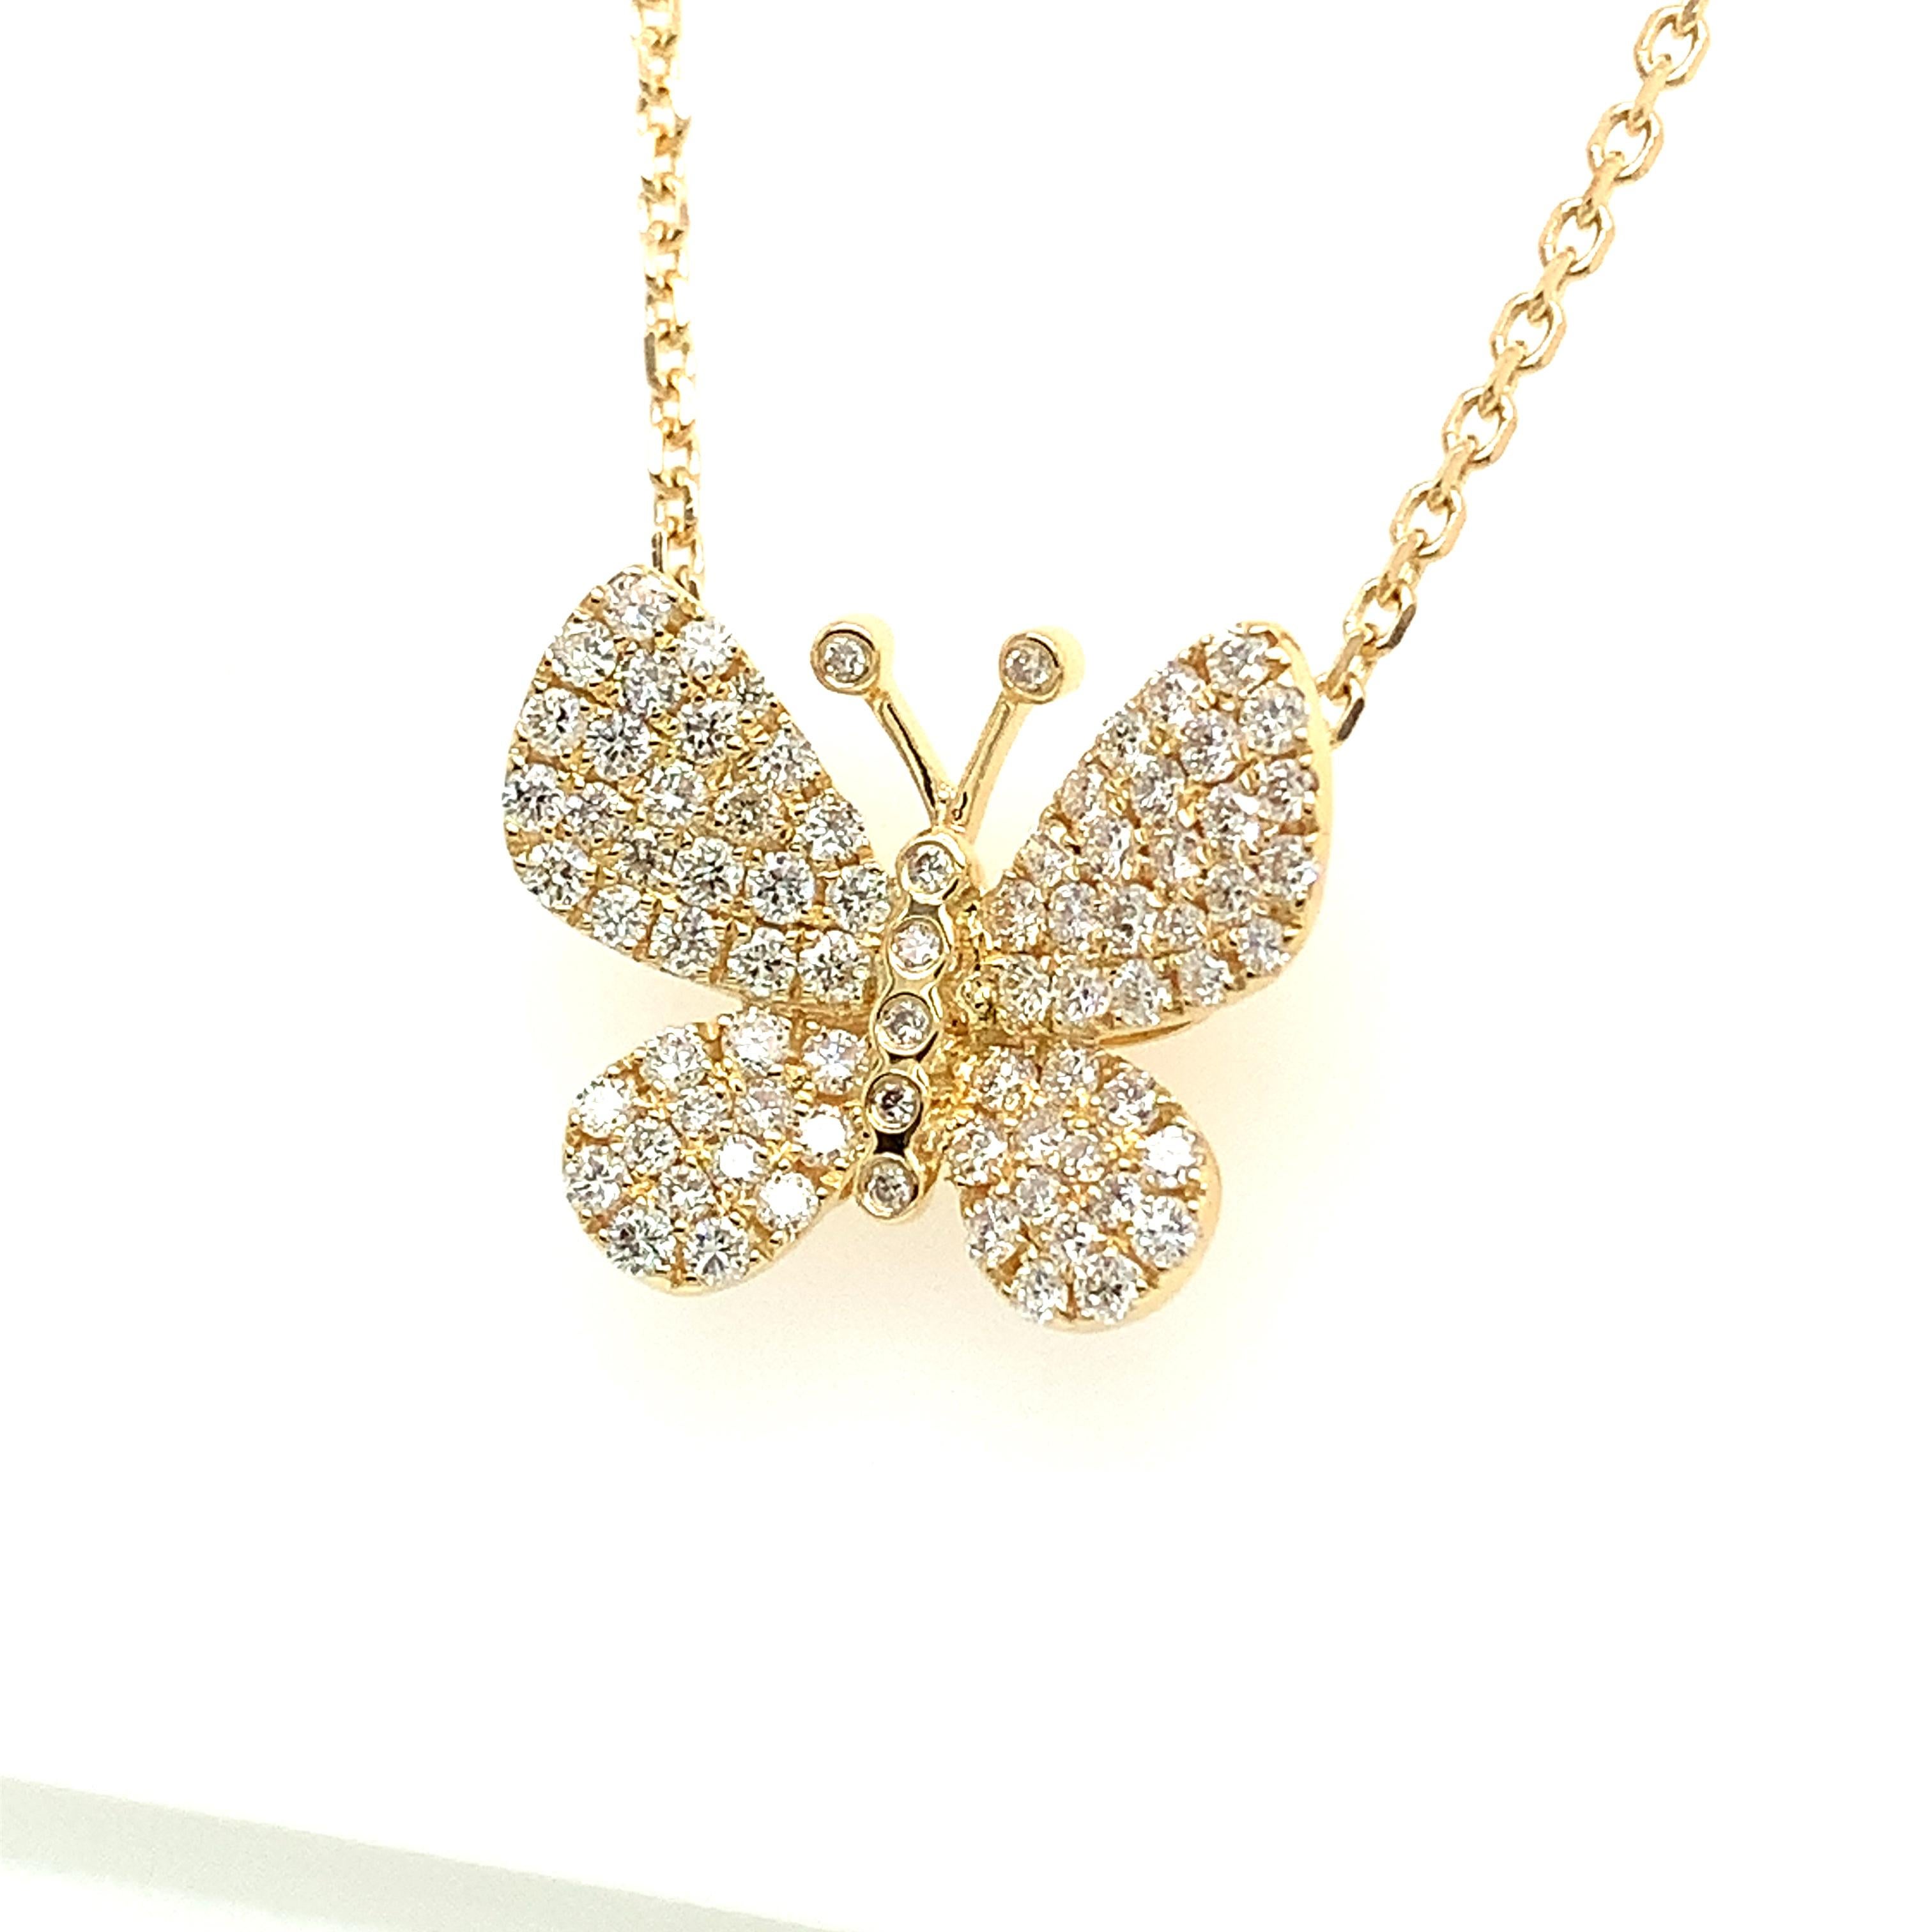 Round Cut Gorgeous 18 Karat Yellow Gold Diamond Butterly Necklace For Sale